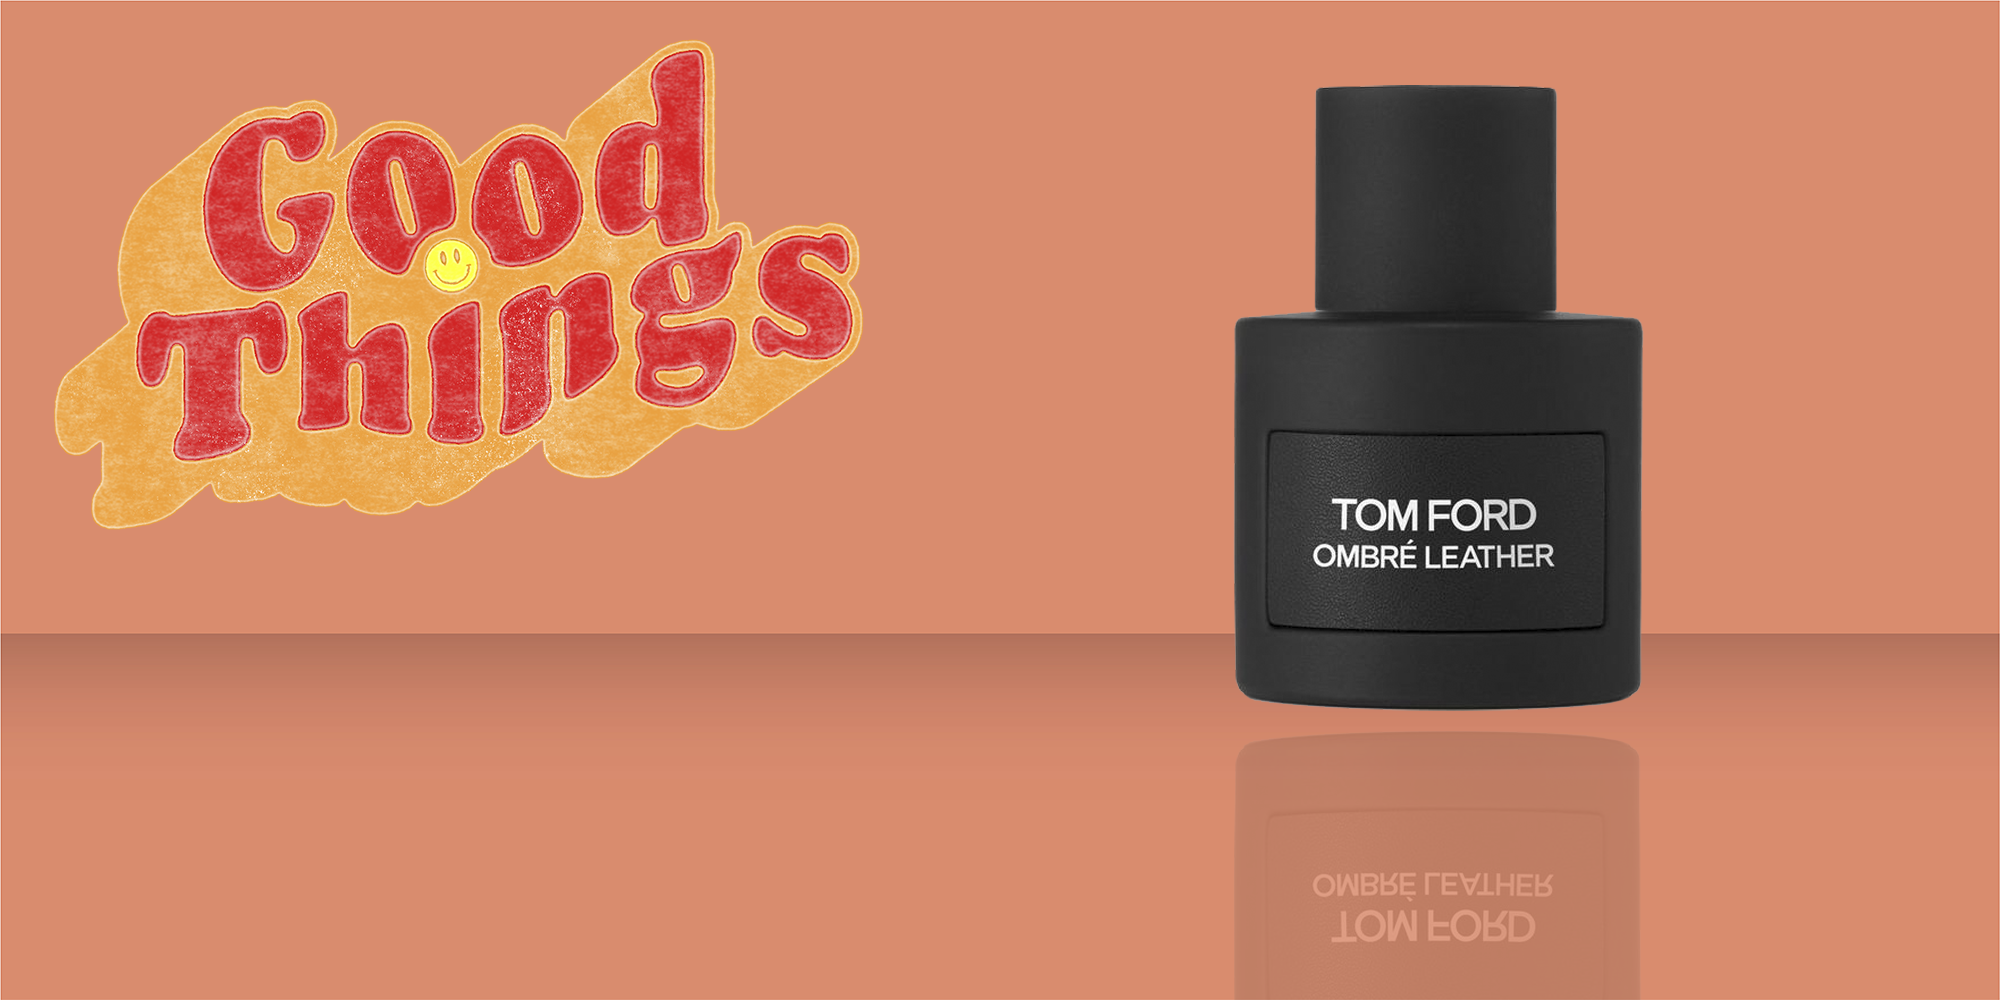 Tom Ford's Ombre Leather Is The Fragrance Every Man Should Wear